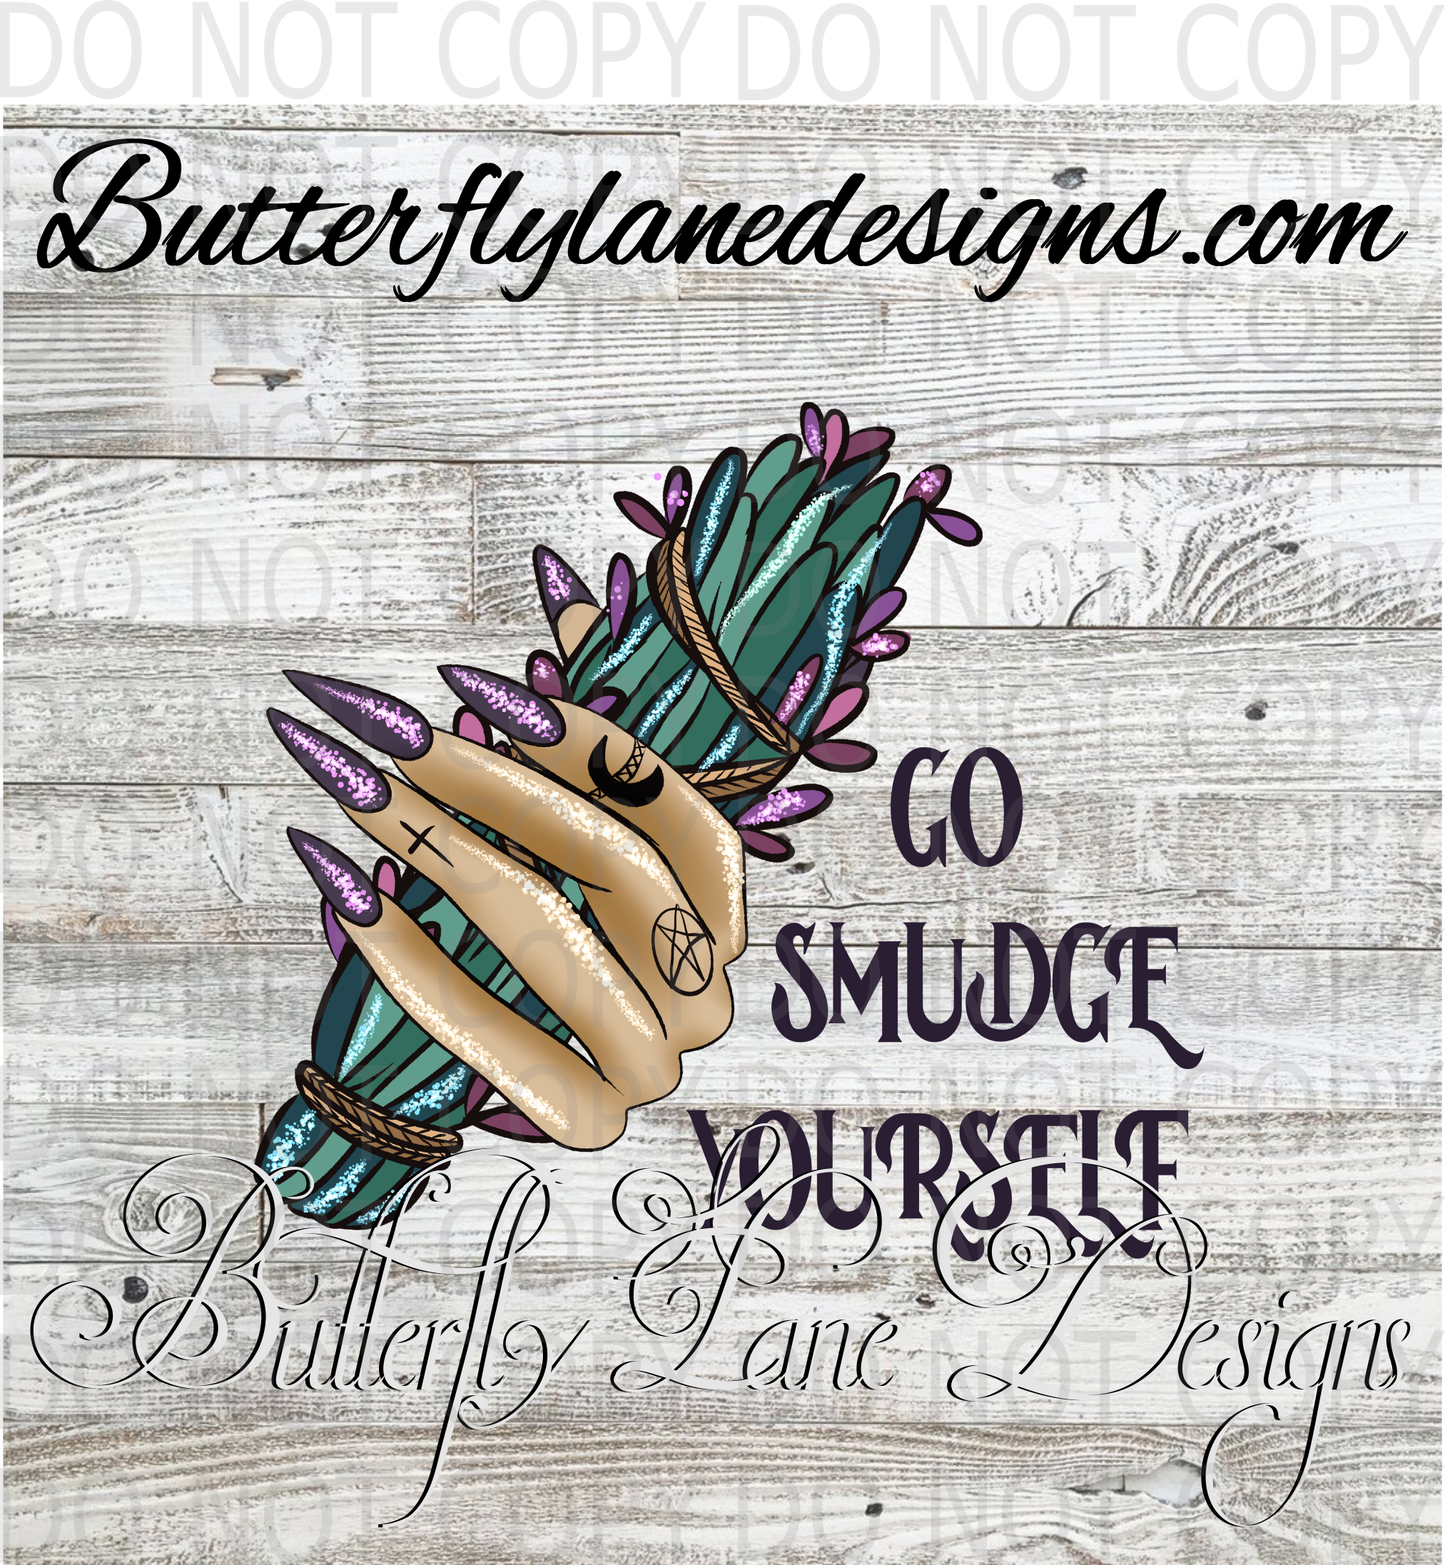 Go smudge yourself-witchy- :: Clear Decal :: VC Decal